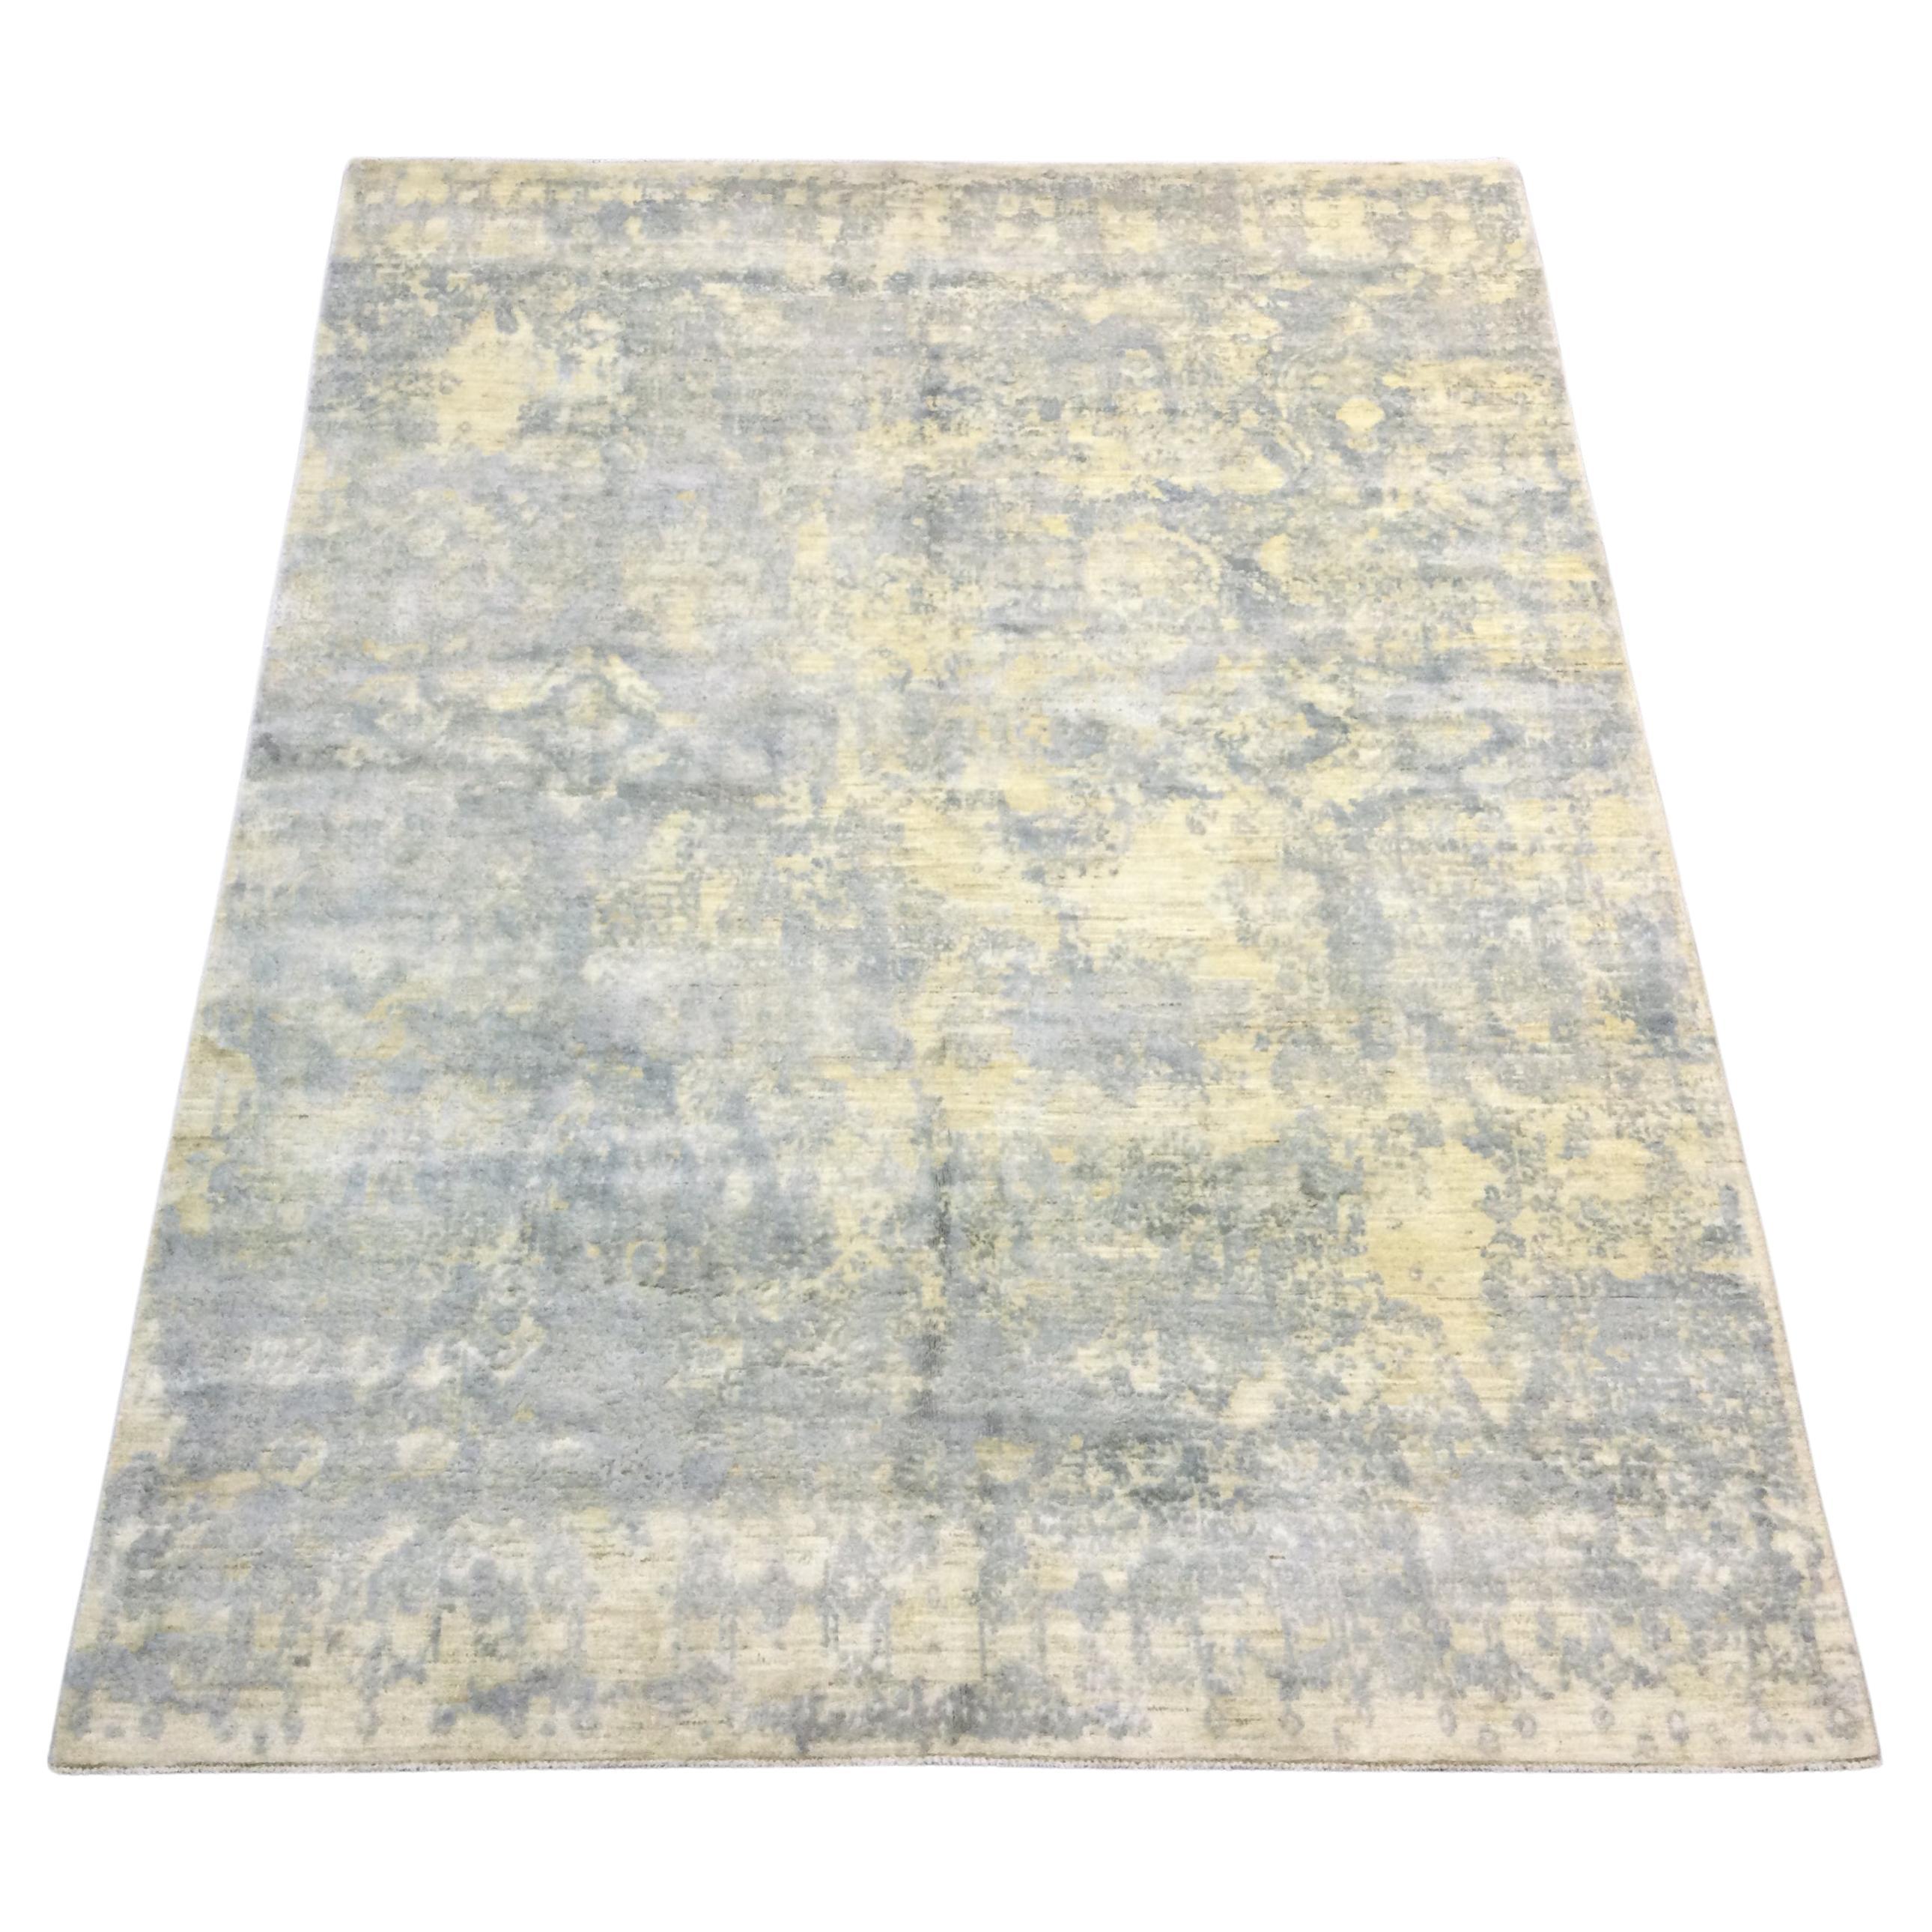 Contemporary Rug. Abstract Design. 3.20 X 2.45 m.